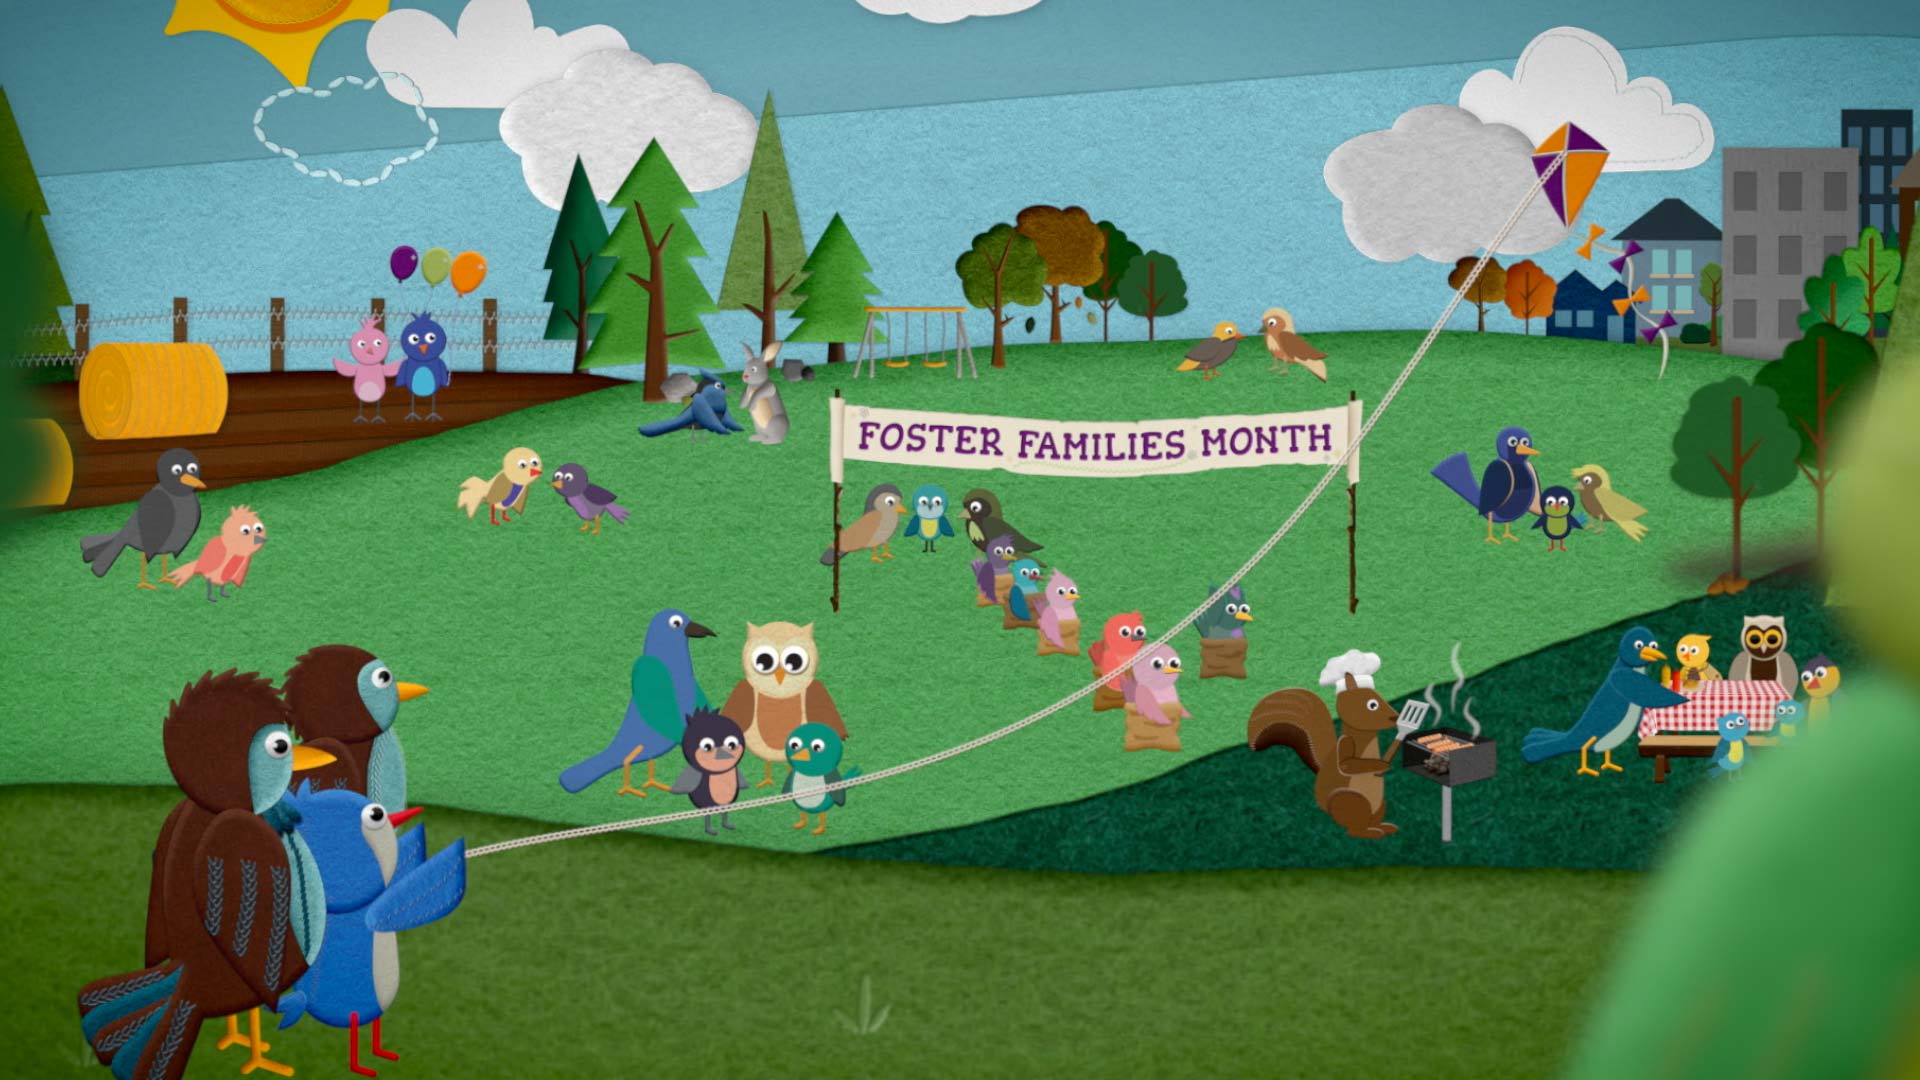 Saskatchewan Foster Families Association, Animation, October is Foster Families Month!, Portfolio Image, Join us in celebrating the important contributions of foster parents and caregivers across the province.